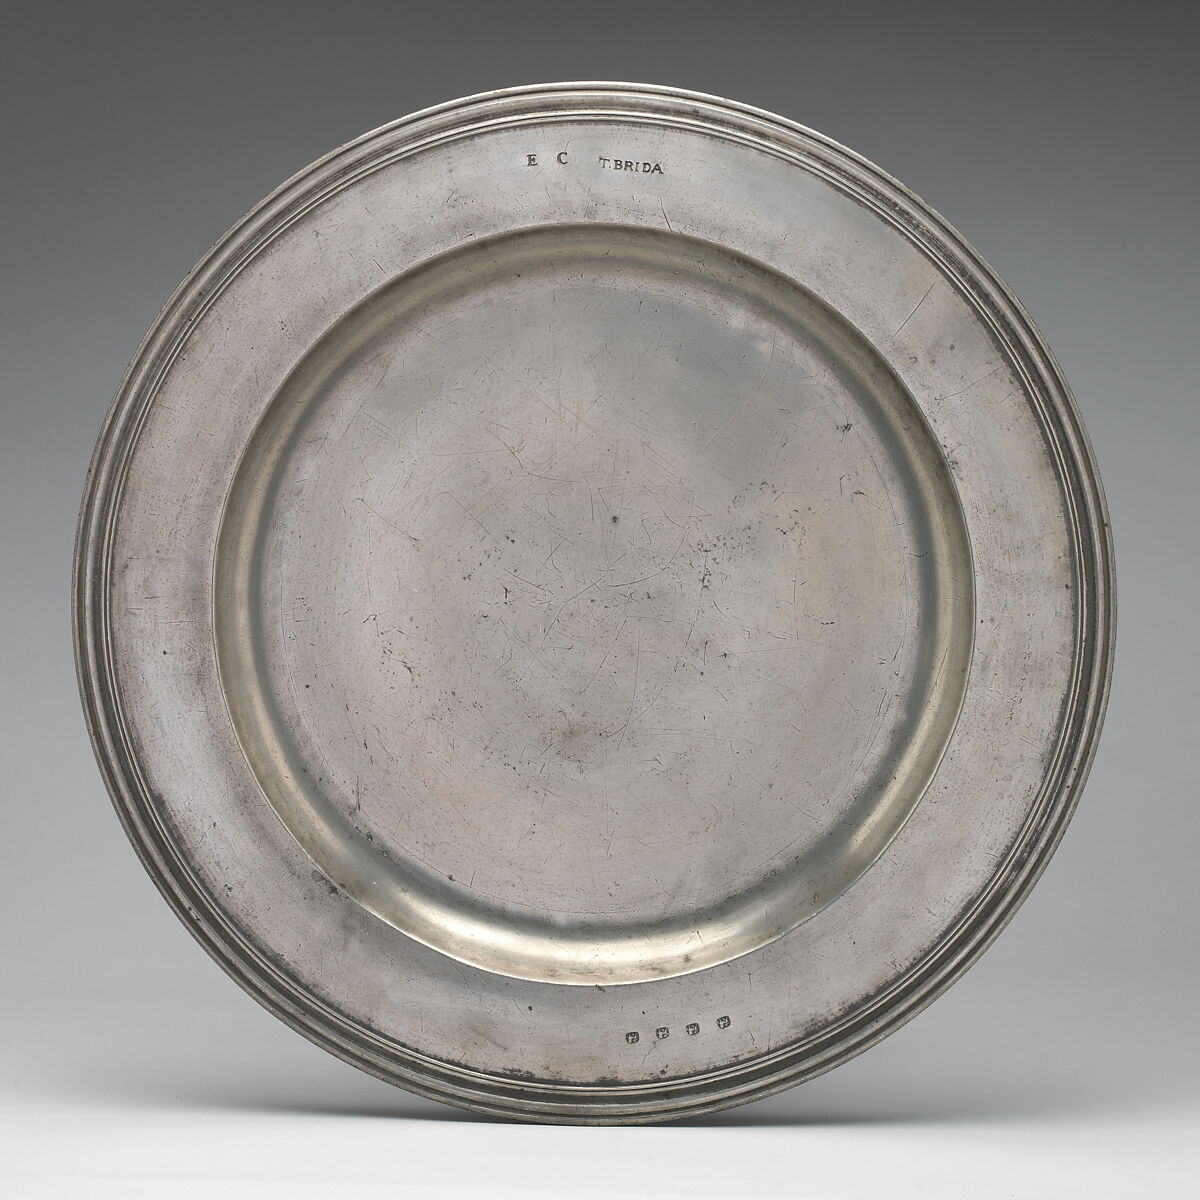 Charger, Benjamin Blackwell, Pewter, probably British, London 